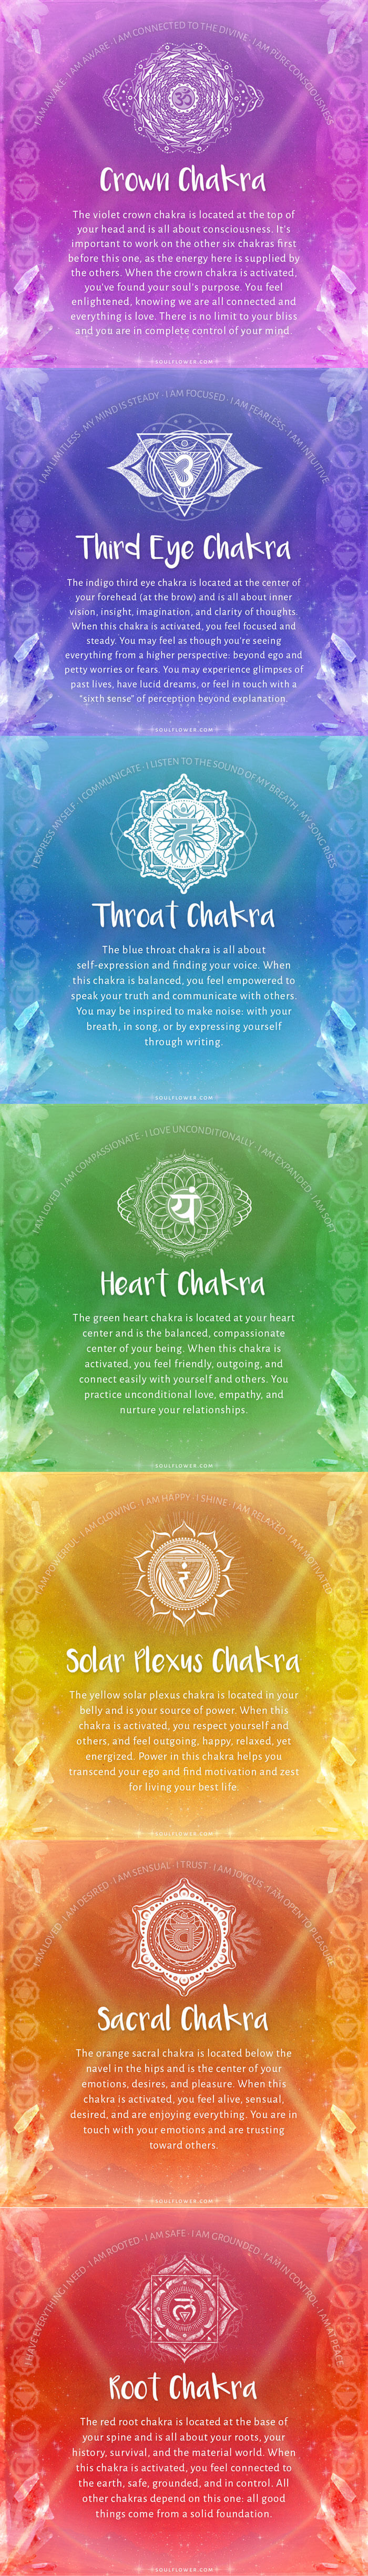 chakra stack updated - How to Activate Your Chakras